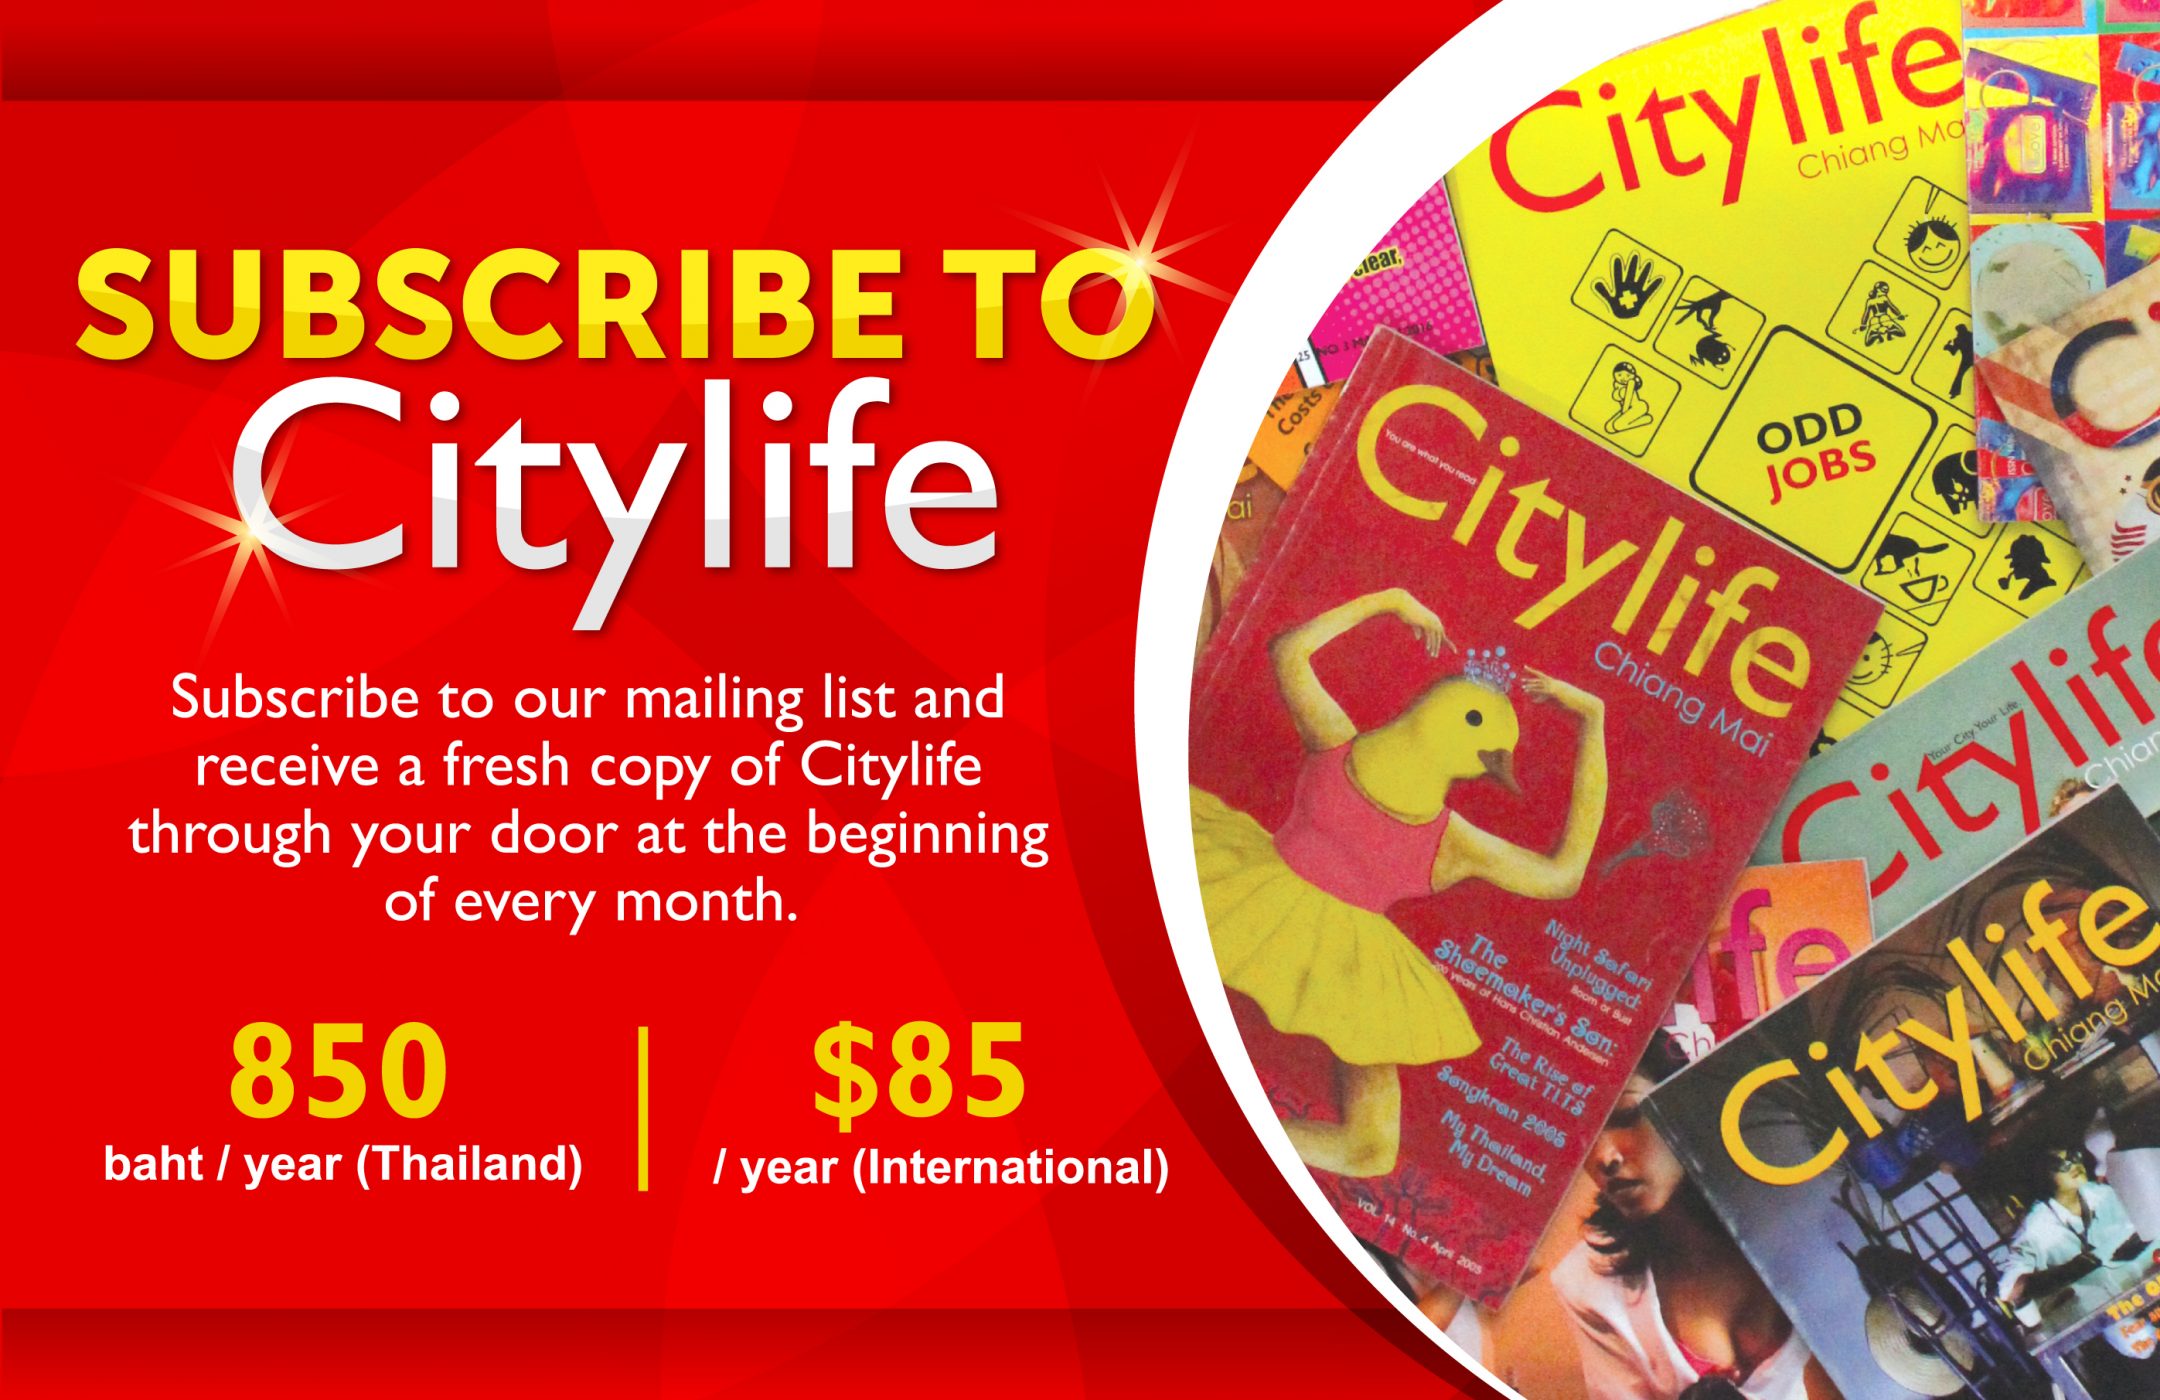 Subscribe to Citylife